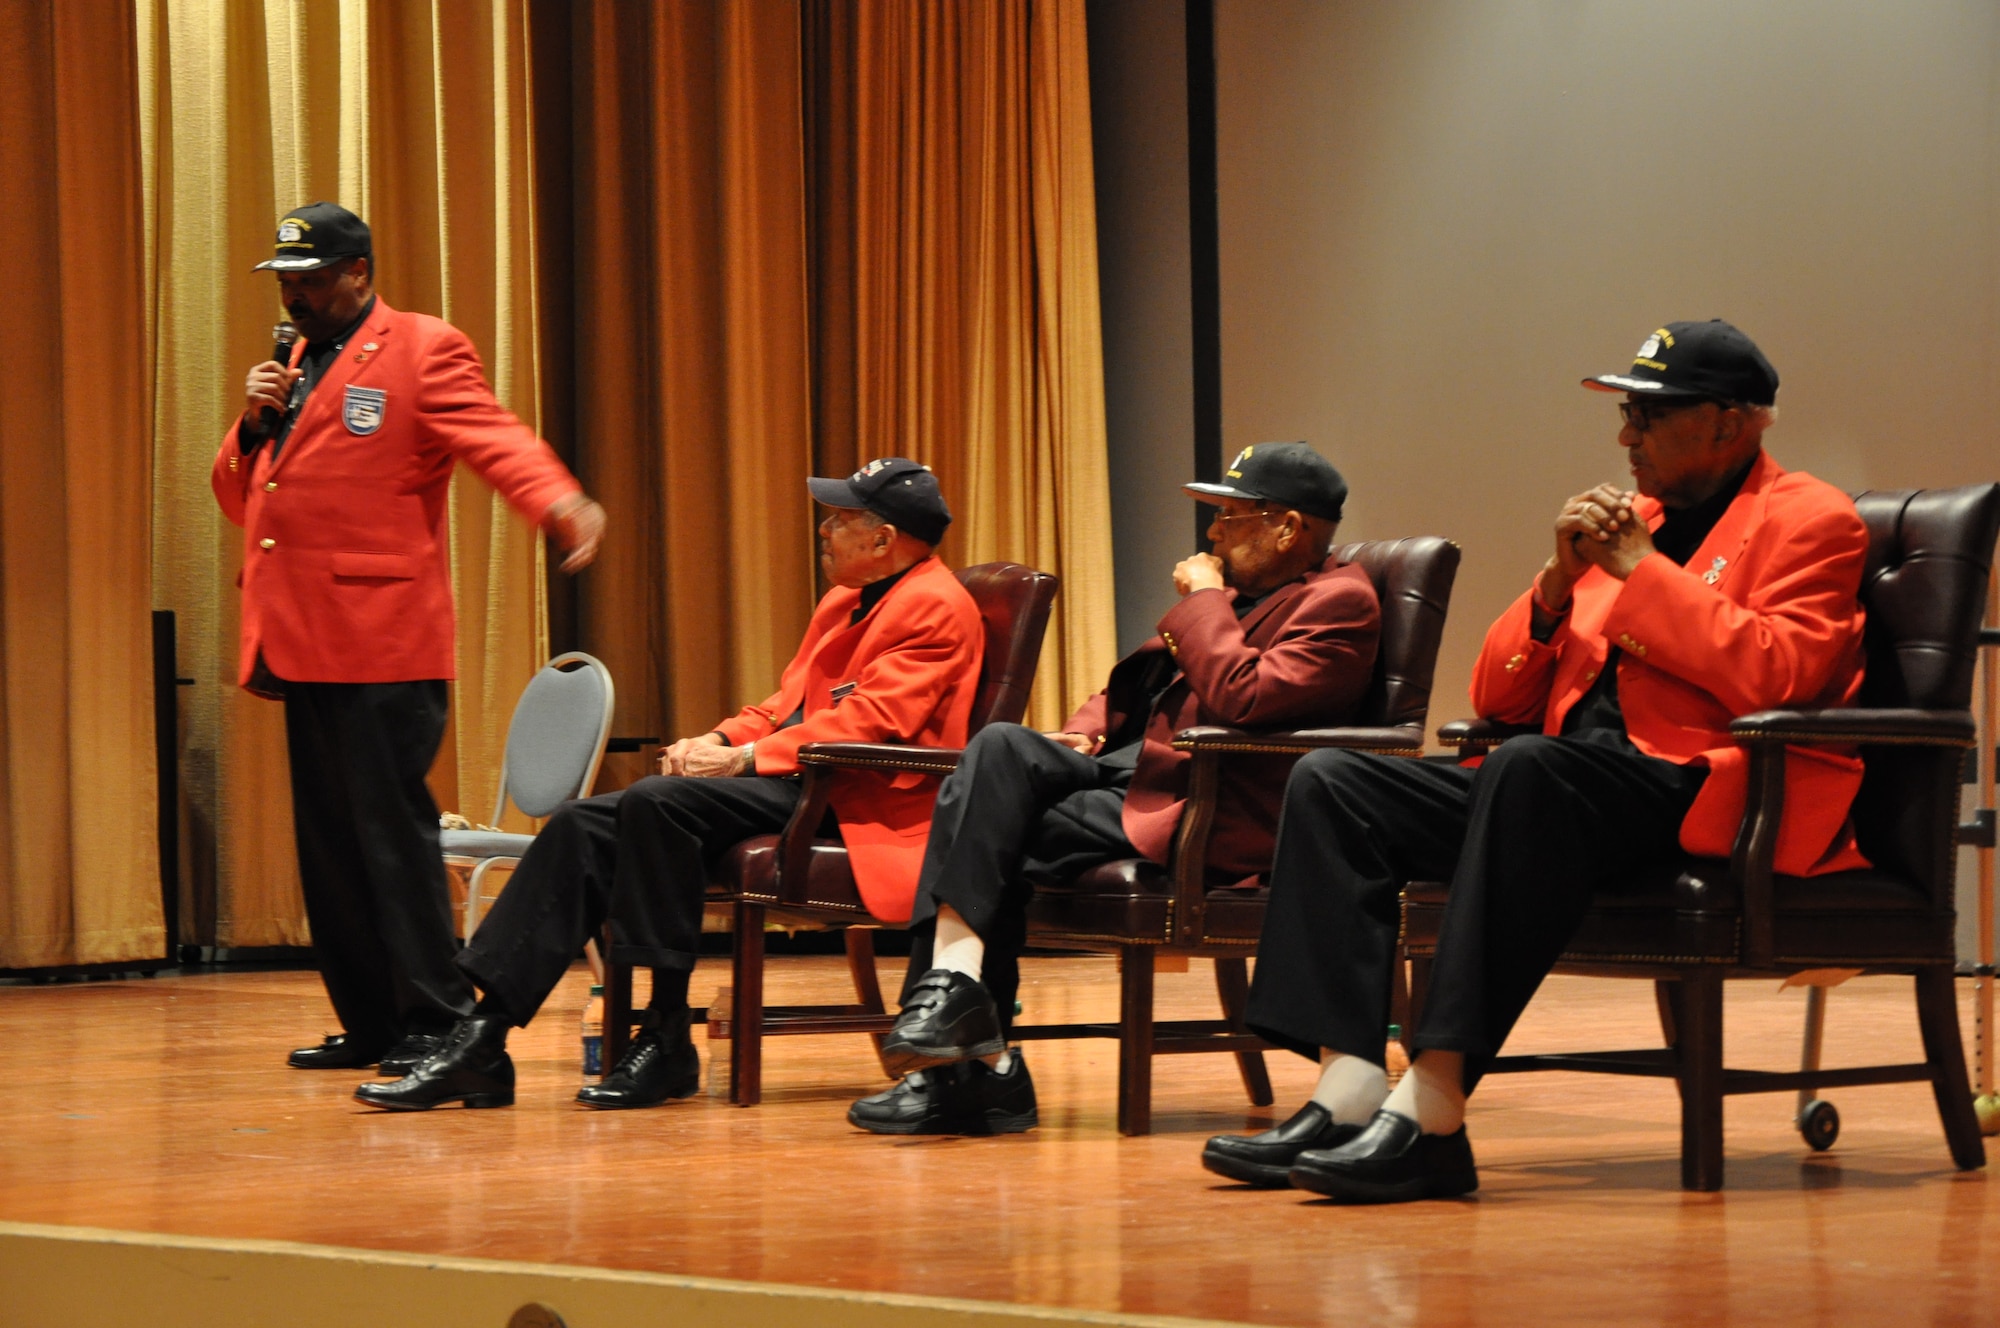 Senior Master Sgt. (Ret.) Walter Suggs (Left), president of a local Tuskegee Airmen Inc. chapter moderates a questions and answer session for three Tuskegee Airmen at the base theater at Beale Air Force Base, Calif., Feb. 24, 2012. The three Airmen attended the Tuskegee Institute in Alabama during World War II. (U.S. Air Force photo by Staff Sgt. Robert M. Trujillo/Released)